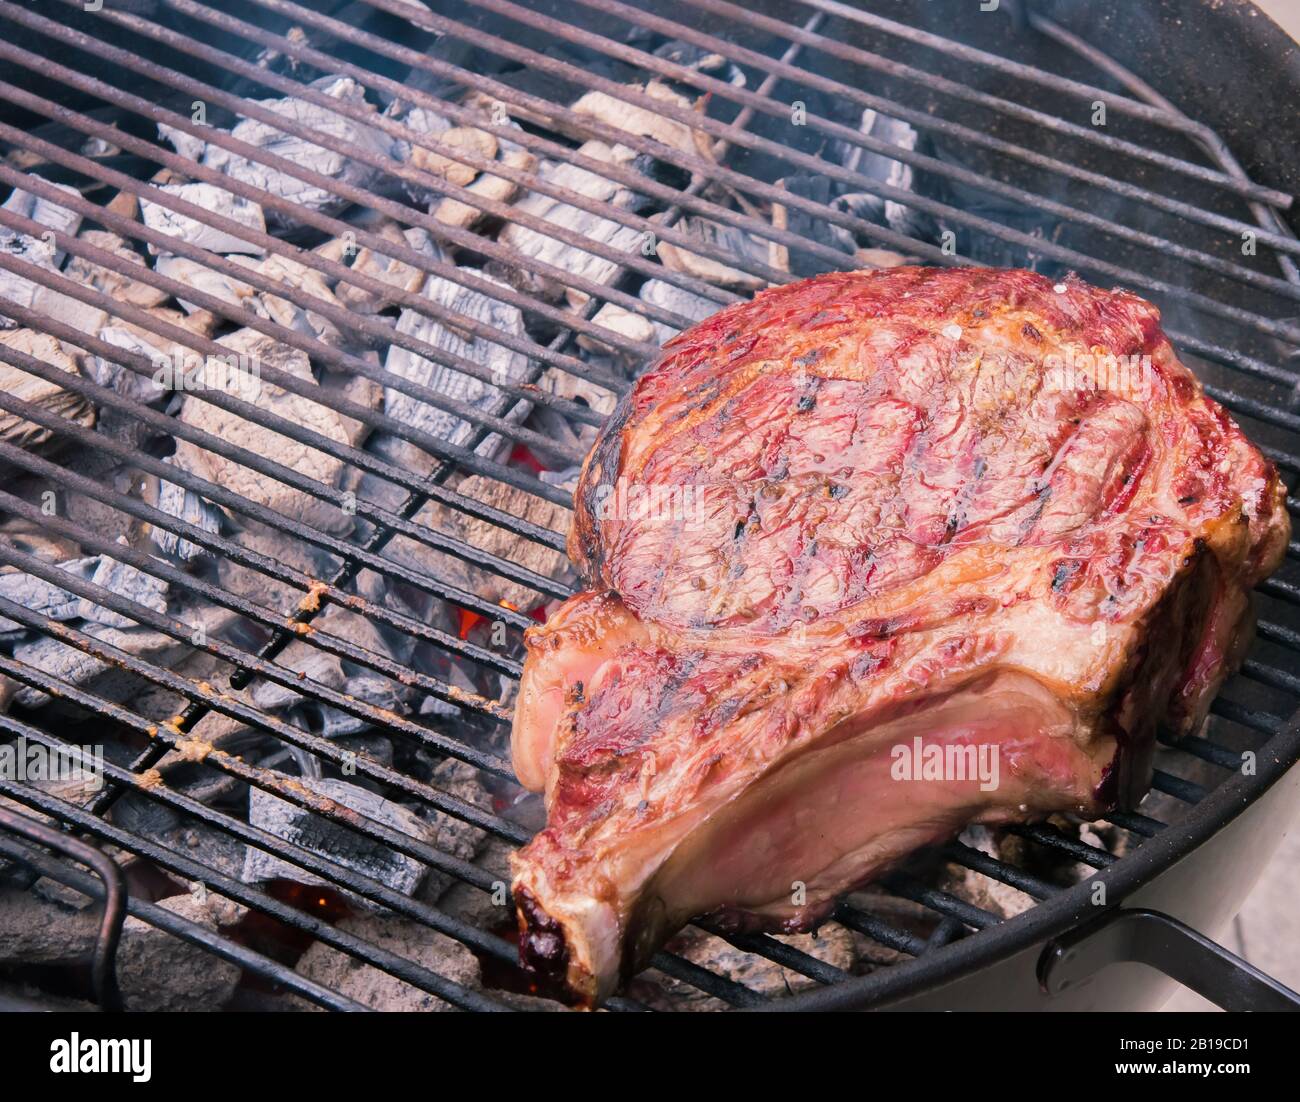 A juicy grilled piece of Tomahawk steak on a charcoal barbeque grill topped  with Himalyan salt Stock Photo - Alamy